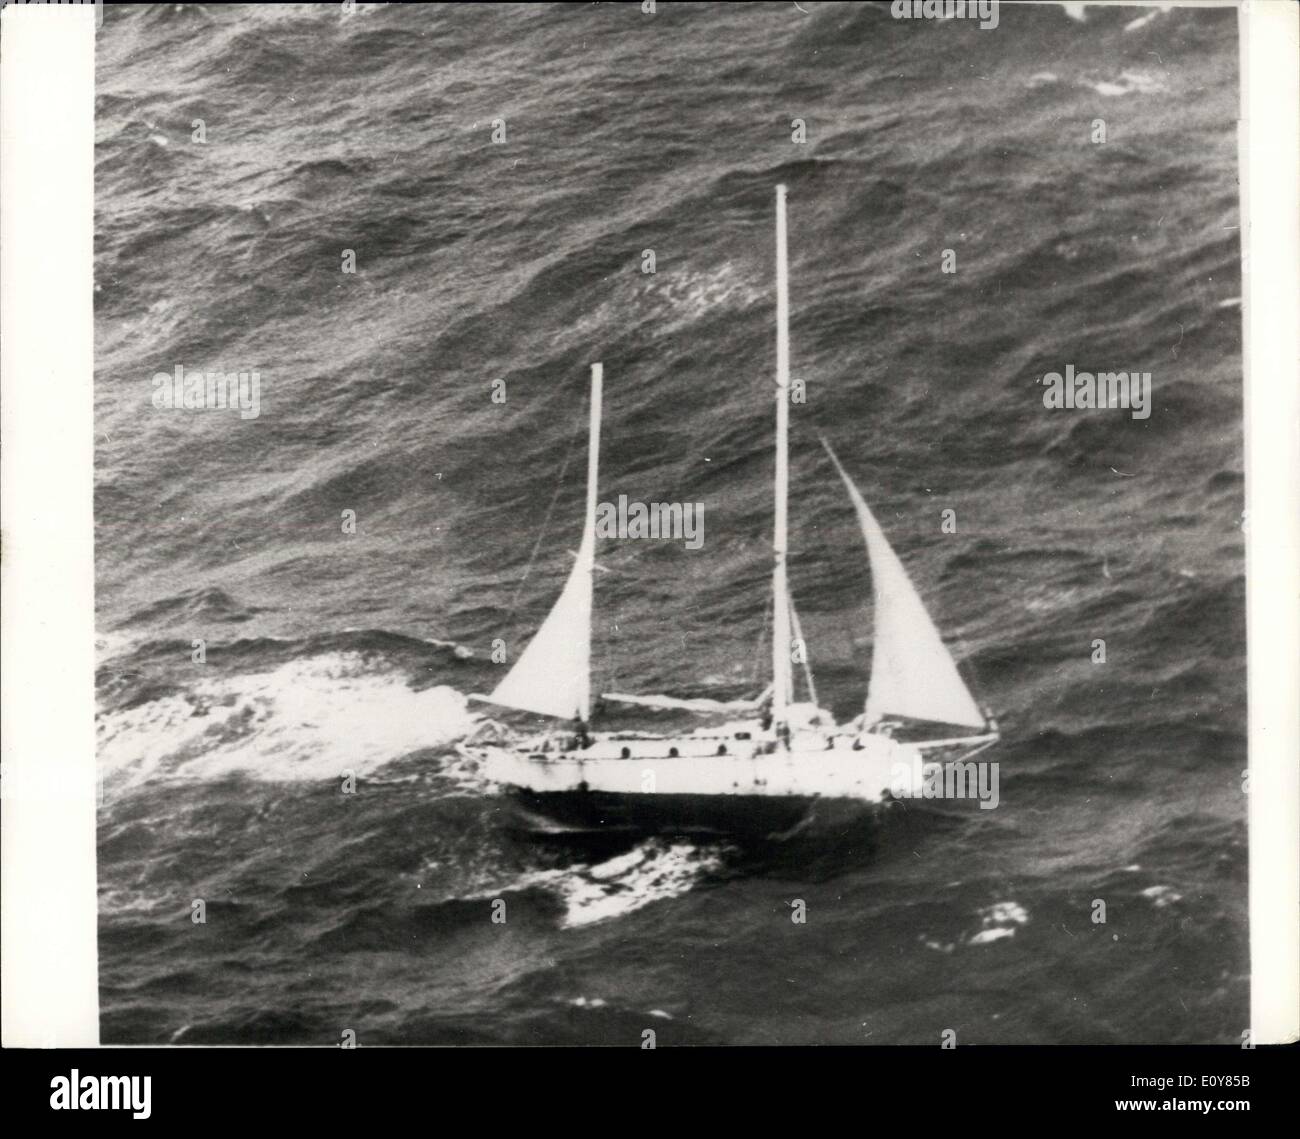 Apr. 19, 1969 - Robin the Lone round-the-world Yachtsman nears his journey's end: Lone round-the-world yachtsman, Robin Knox Johnston, was heading for Falmouth today and nearing his journey's end. The 30-year-old yachtsman's 32-foot ketch Suhaily was about 100-miles off Land's End on the last leg of his non-stop voyage round the world. Today he was spending his 309th day of solitary confinement in the craft that has taken him 30,000-miles. It is almost certain that Robin will be the first man home in the race organized by the Sunday Times newspaper Stock Photo